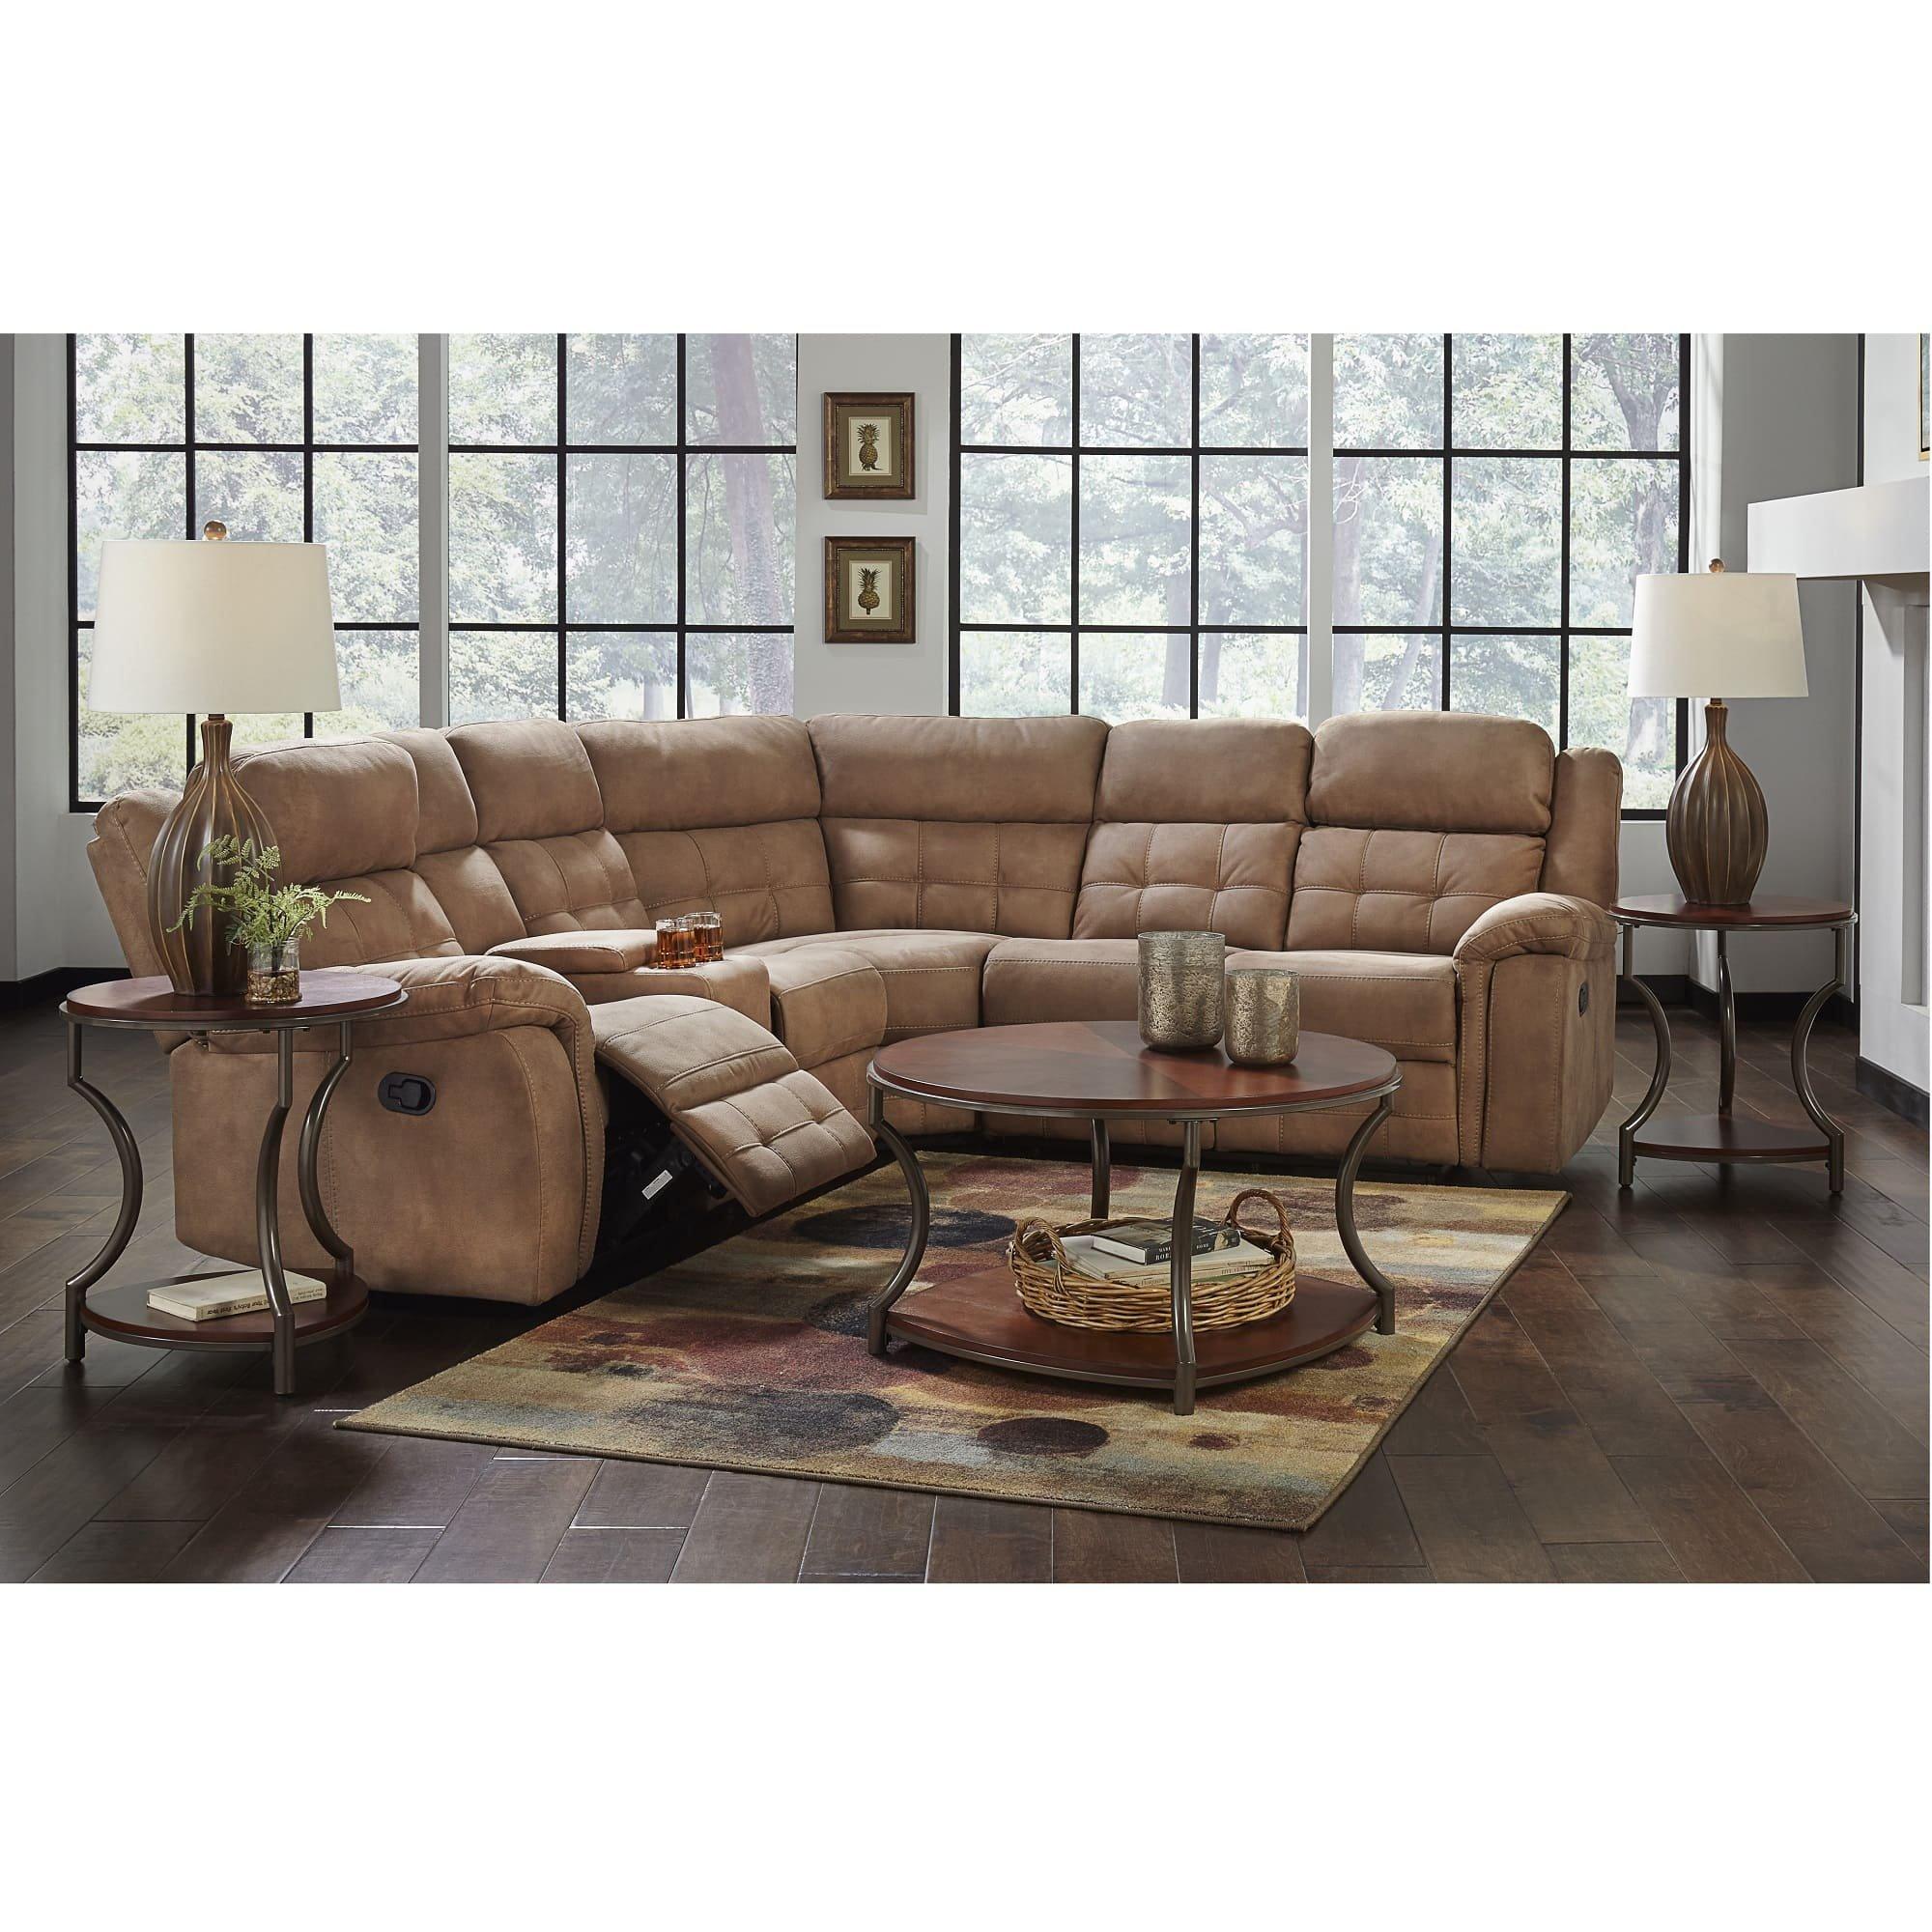 Rent To Own Amalfi 3 Piece Cobalt Reclining Sectional Living Room Collection At Aarons Today